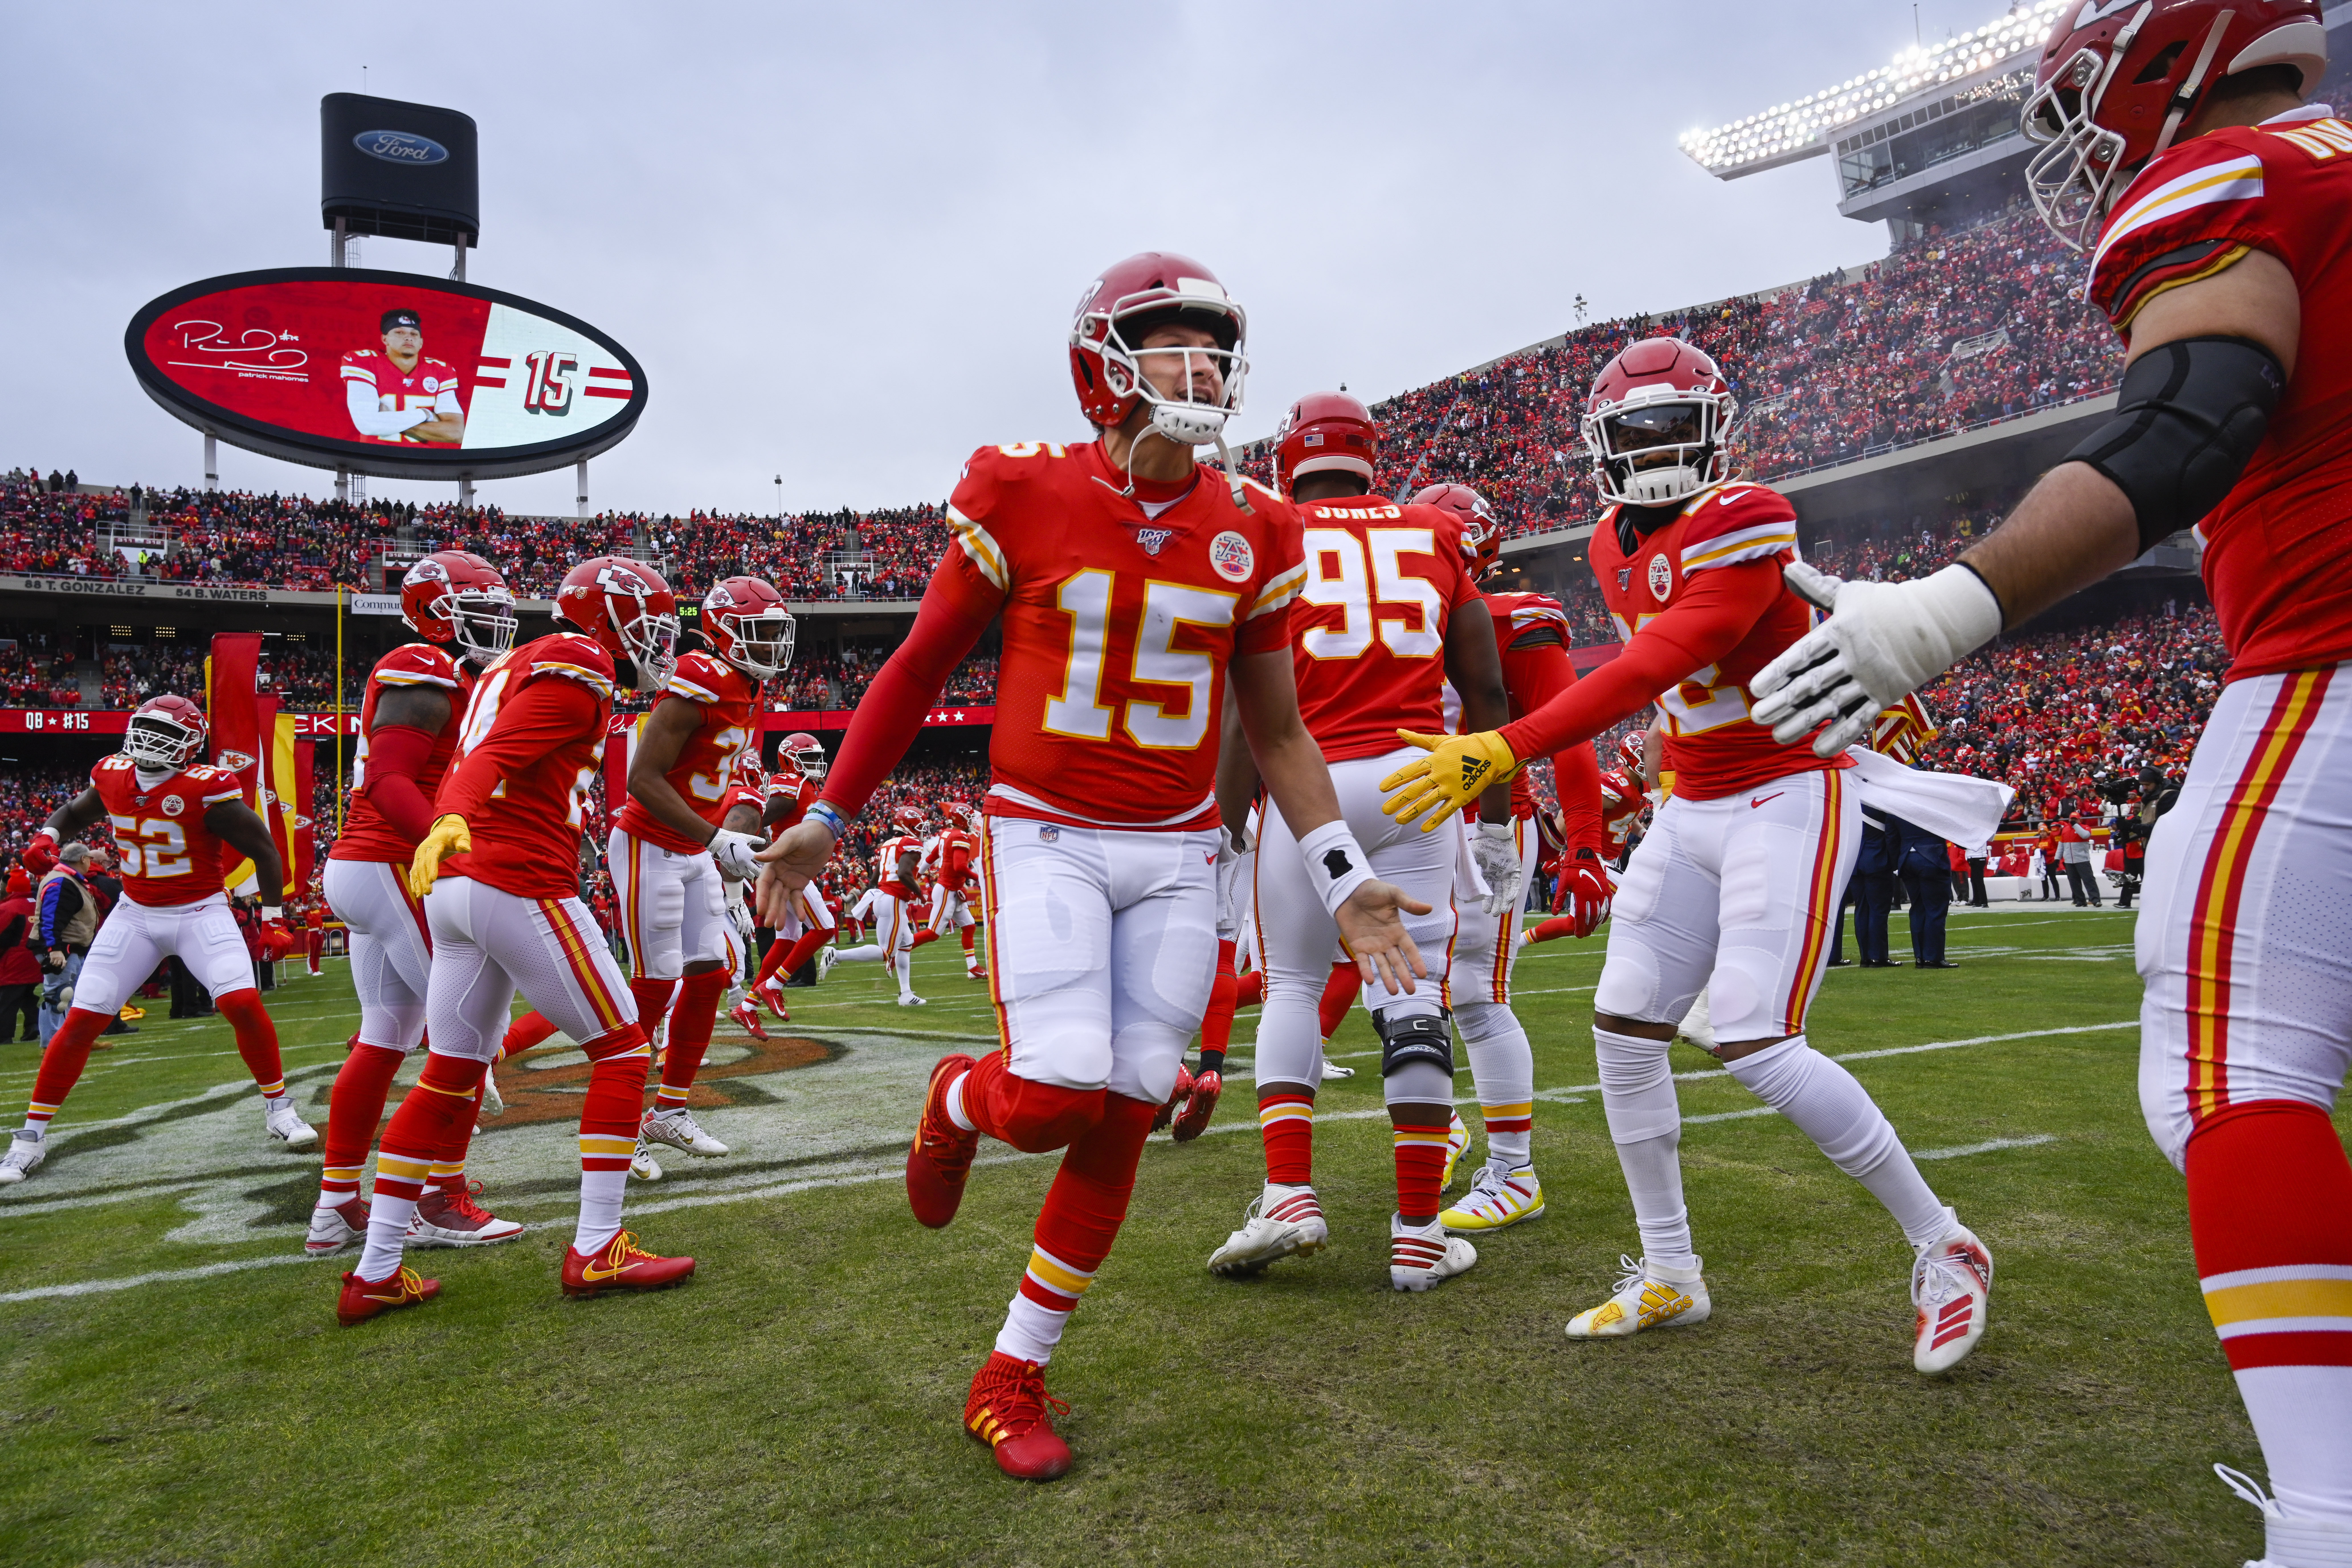 Chiefs Patrick Mahomes Lands Record Breaking 503m Contract What It Means For Cowboys Dak Prescott How Does Deal Compare To Eagles Carson Wentz Seahawks Russell Wilson Update Nj Com